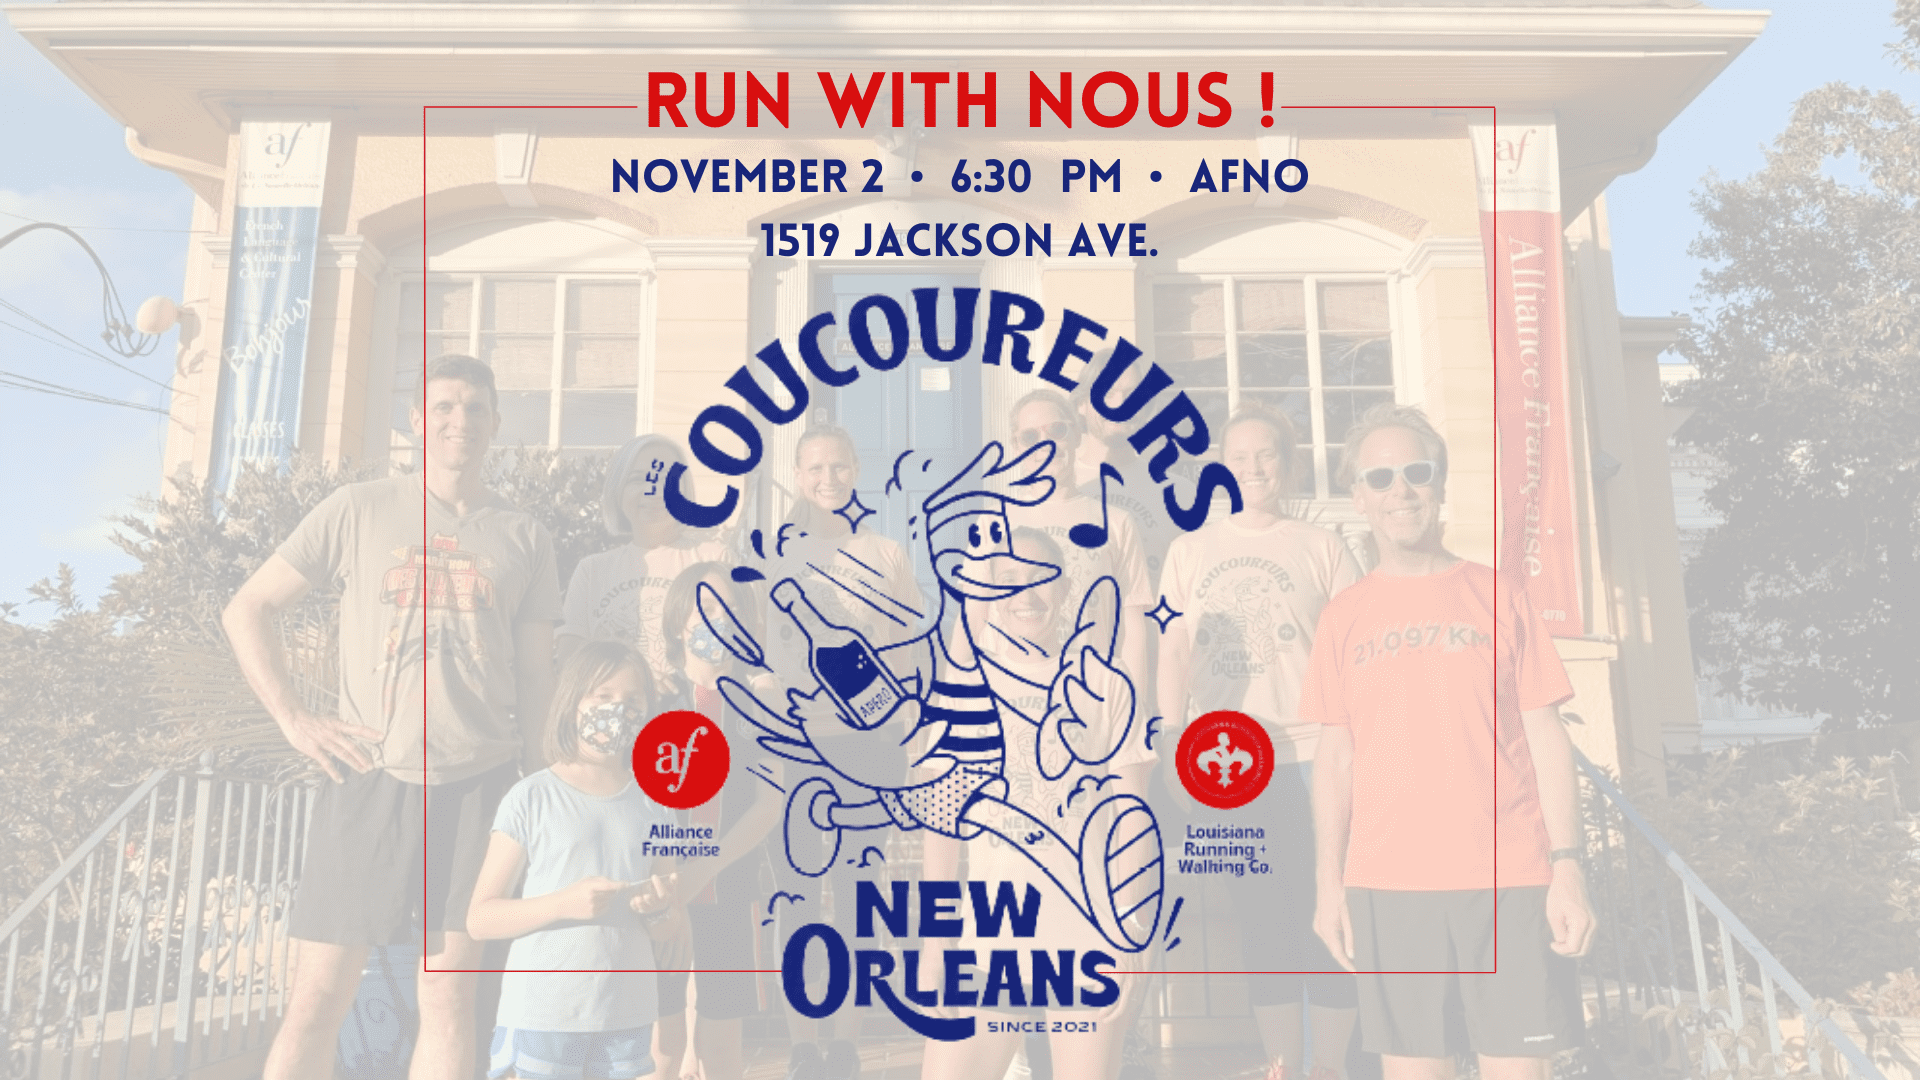 Les Coucoureurs Running Club